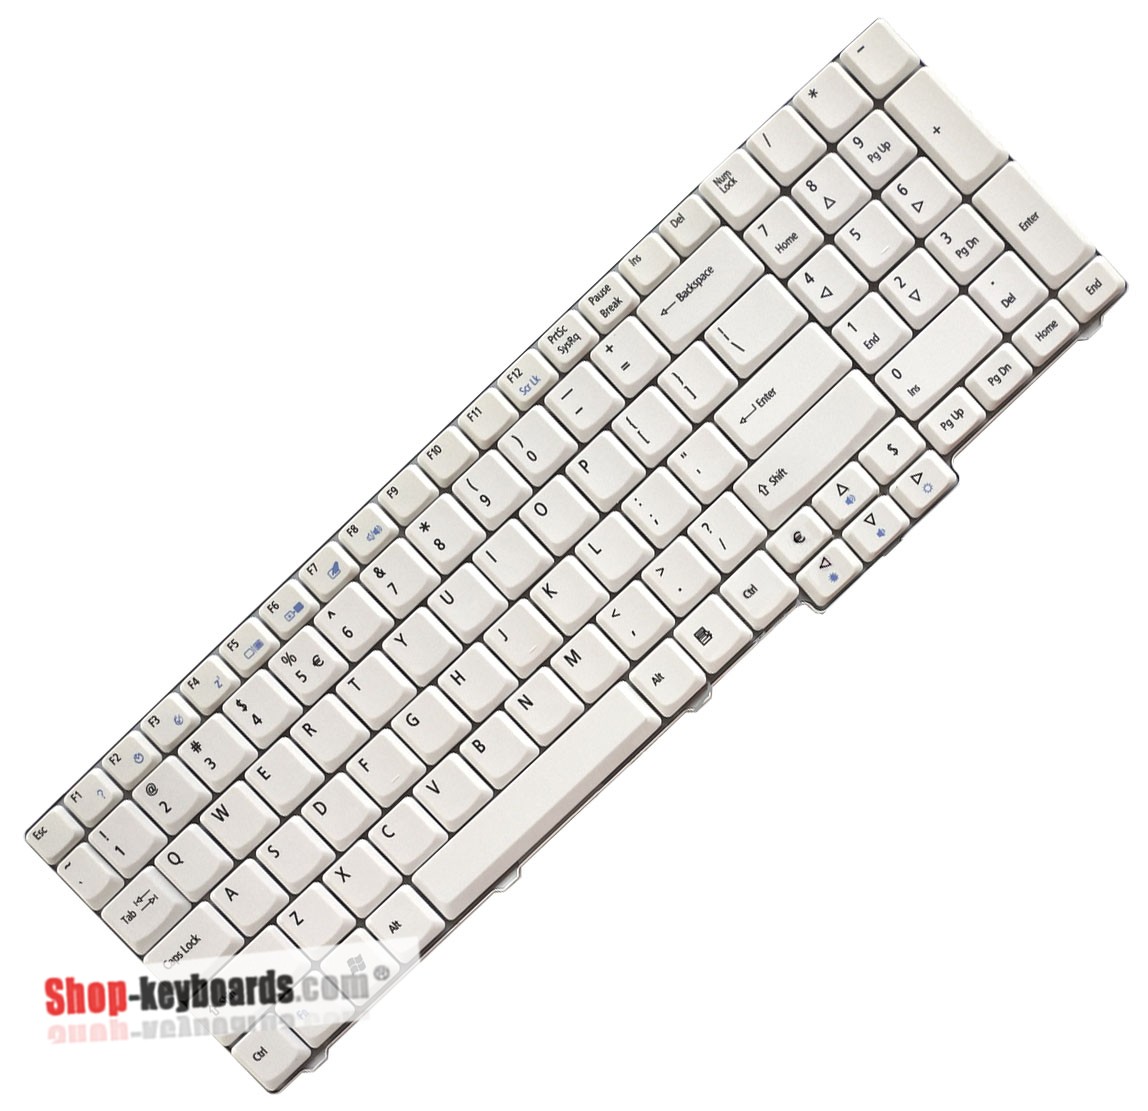 Acer Aspire 9424 Keyboard replacement